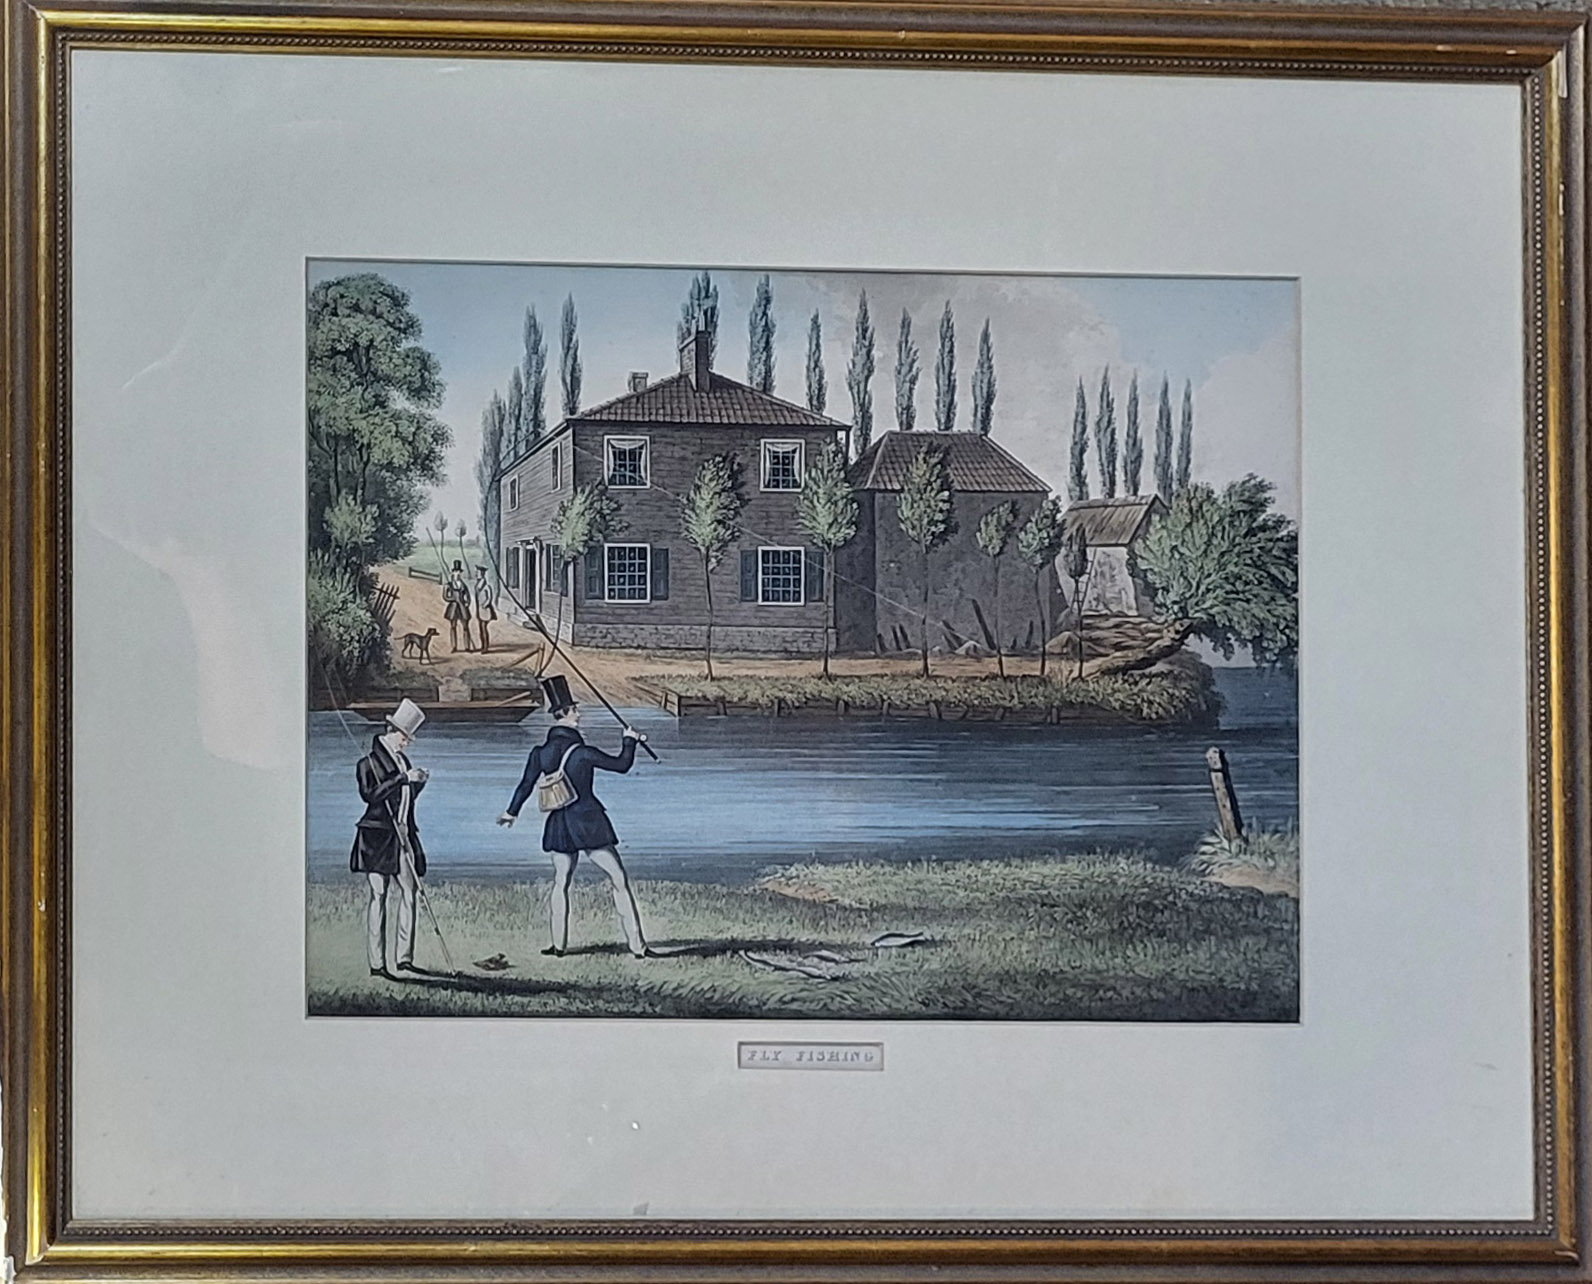 A 19TH CENTURY 'FLY FISHING' HAND COLOURED ENGRAVING Two gent’s wearing period attire near a